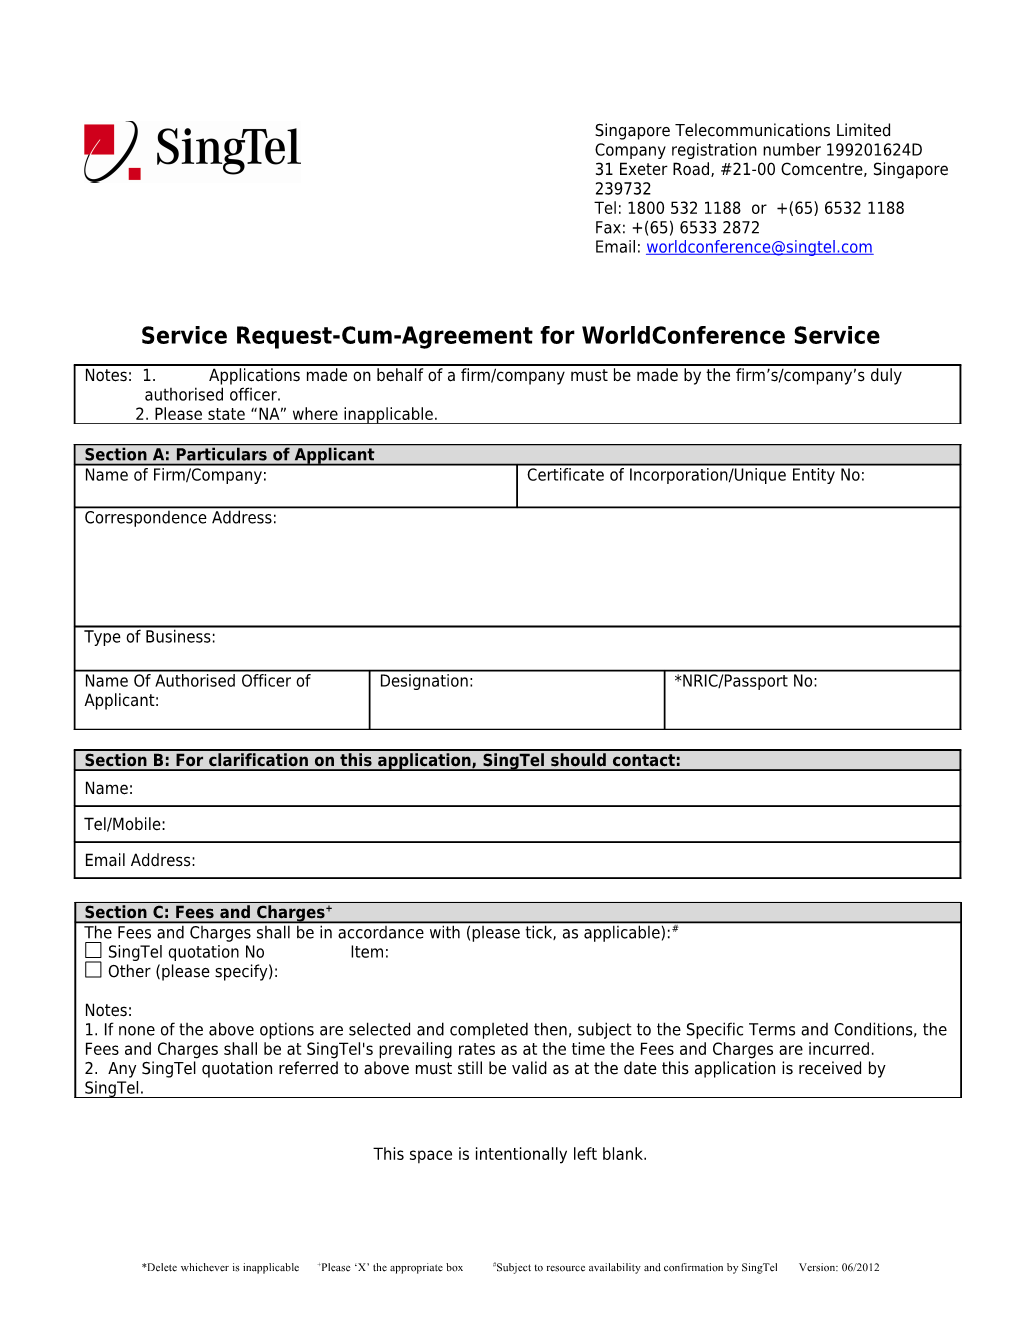 Service Request-Cum-Agreement for Worldconference Service